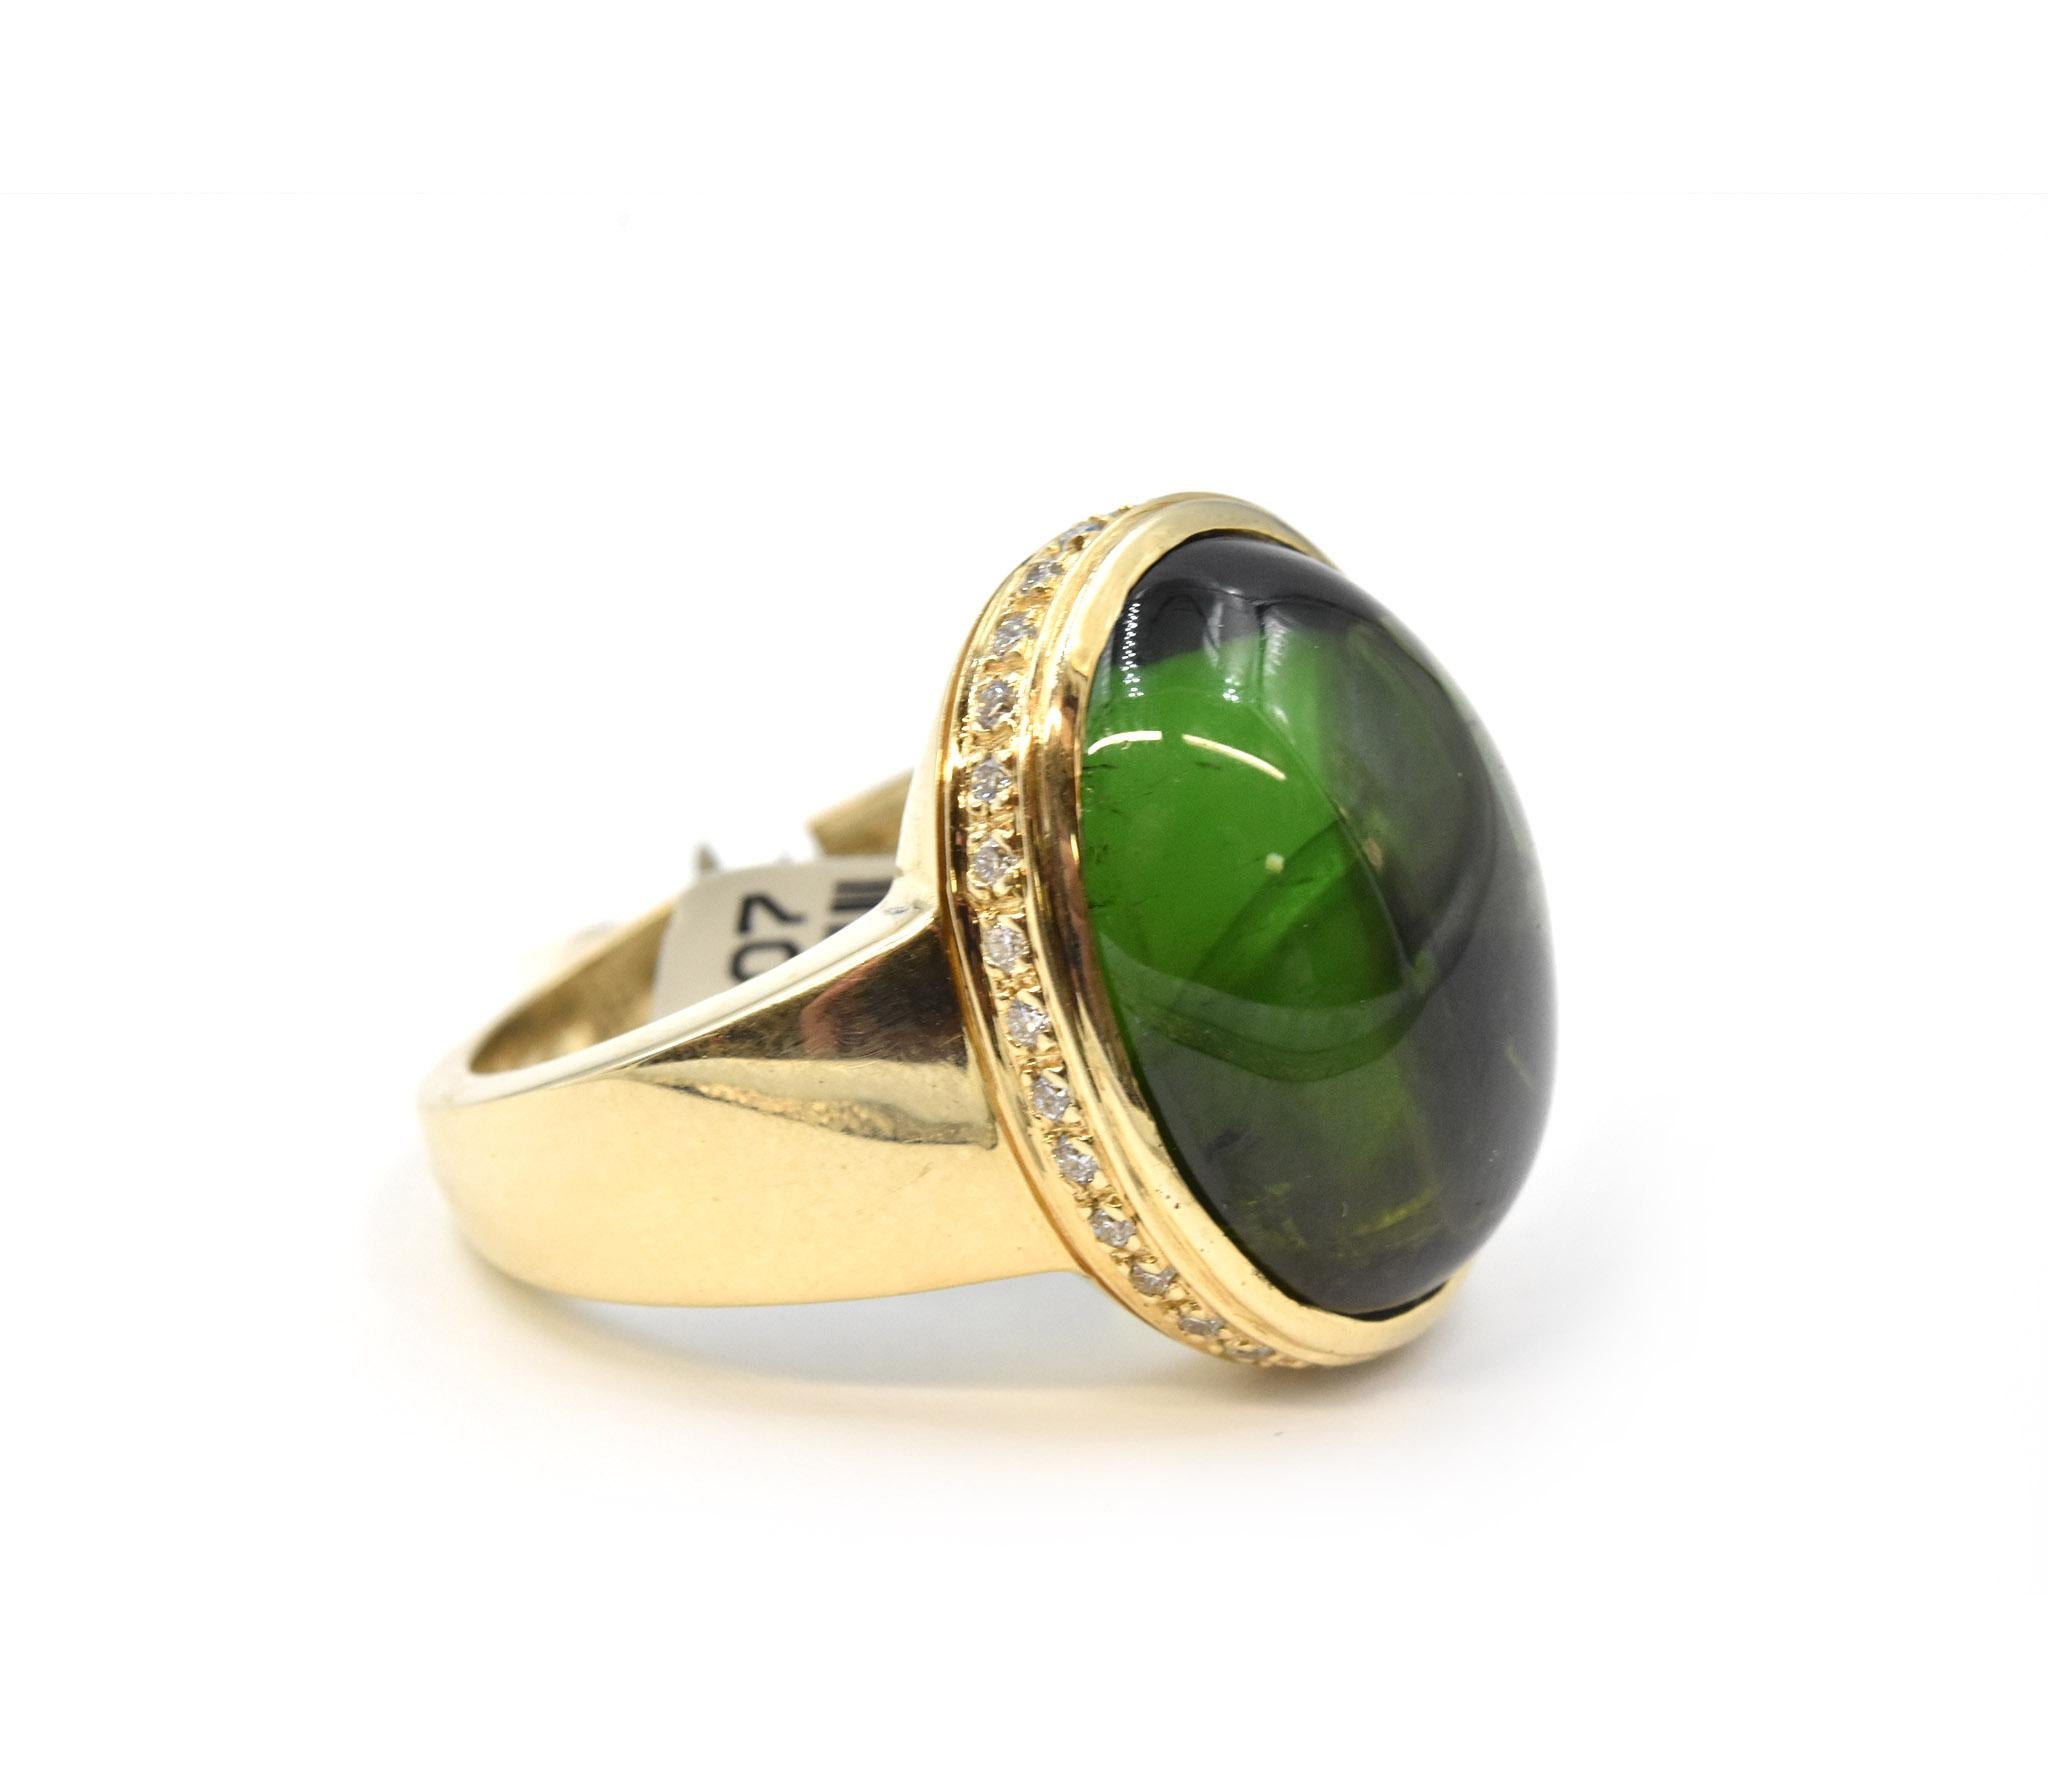 Designer: custom design
Material: 14 Yellow Gold
Green Tourmaline: 18.31ct
Diamonds: 31 Round Diamonds = .36cttw
Color: I
Clarity: SI1
Weight: 14.4g
Ring Size: 8
Dimensions: 16.84mm X 20.9mm 
